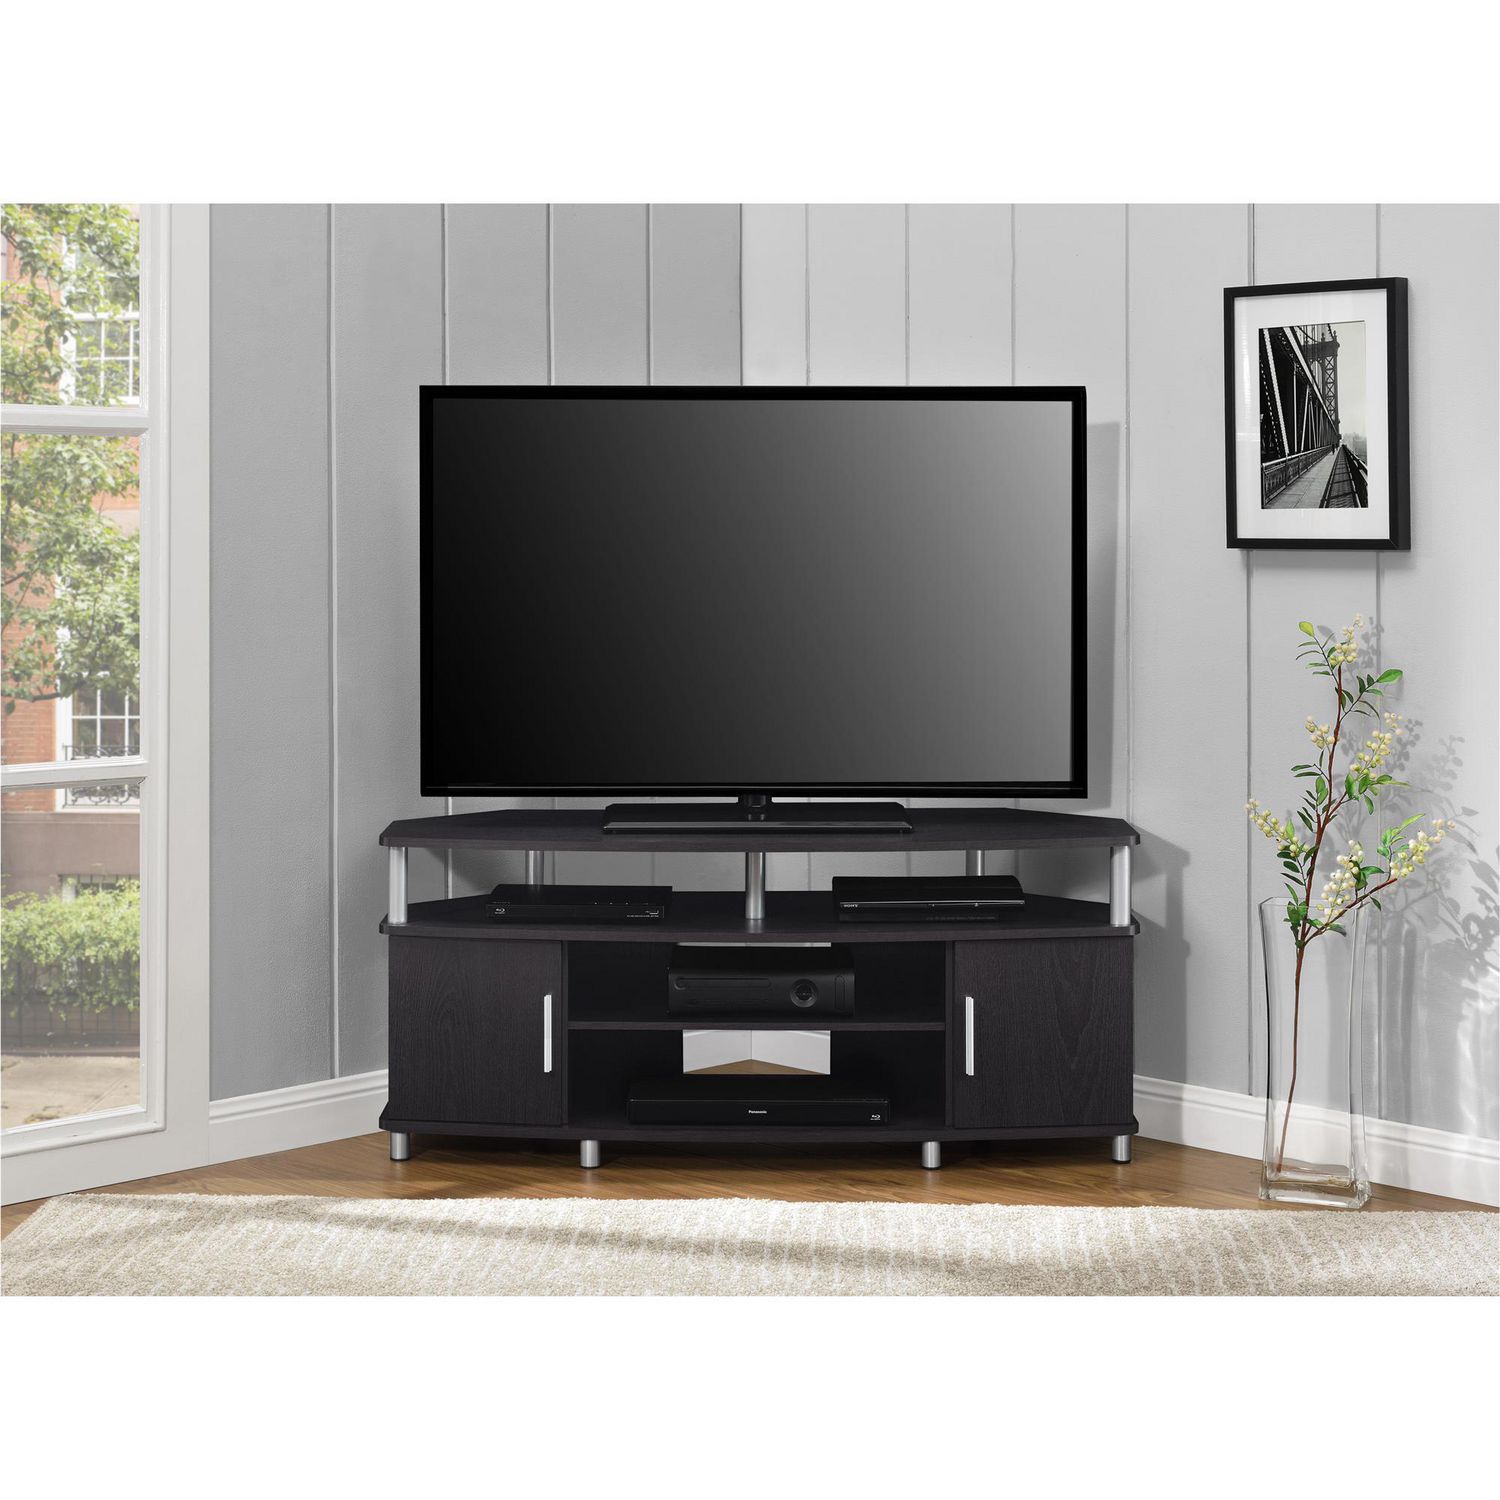 Carson Corner TV Stand for TVs up to 50", Black/Cherry ...